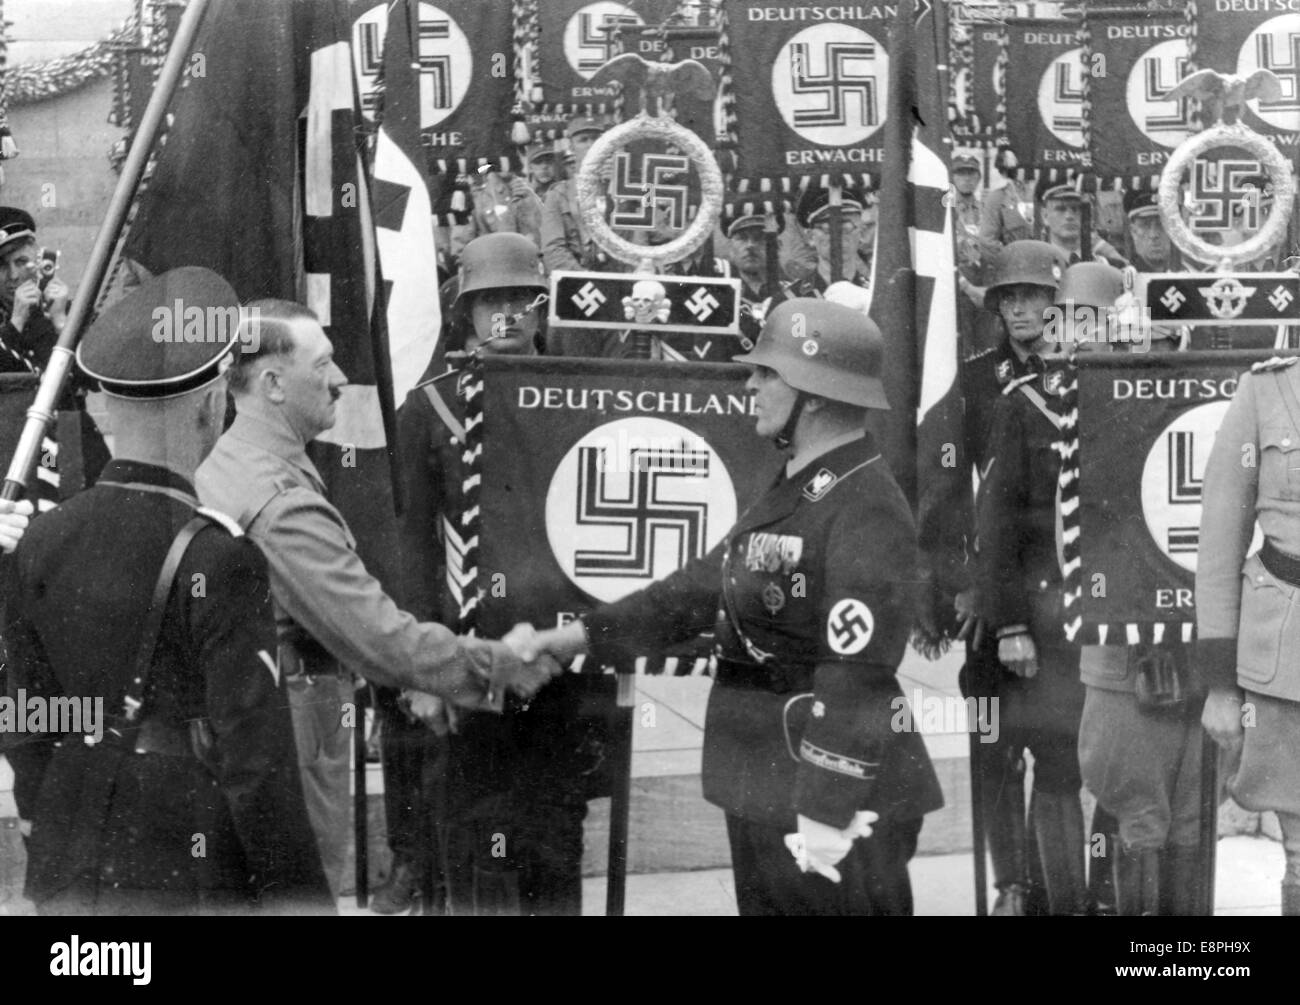 Nuremberg Rally 1937 in Nuremberg, Germany - Adolf Hitler consecrates new standards with the 'Blood Flag' during the roll call of Sturmabteilung (SA), Schutzstaffel (SS) and National Socialist Motor Corps (NSKK), here handshake after the consecration. New standards were consecrated by touching them with the 'Blood Flag' which supposedly was carried in the failed Beer Hall Putsch in Munich. (Flaws in quality due to the historic picture copy) Fotoarchiv für Zeitgeschichtee - NO WIRE SERVICE - Stock Photo